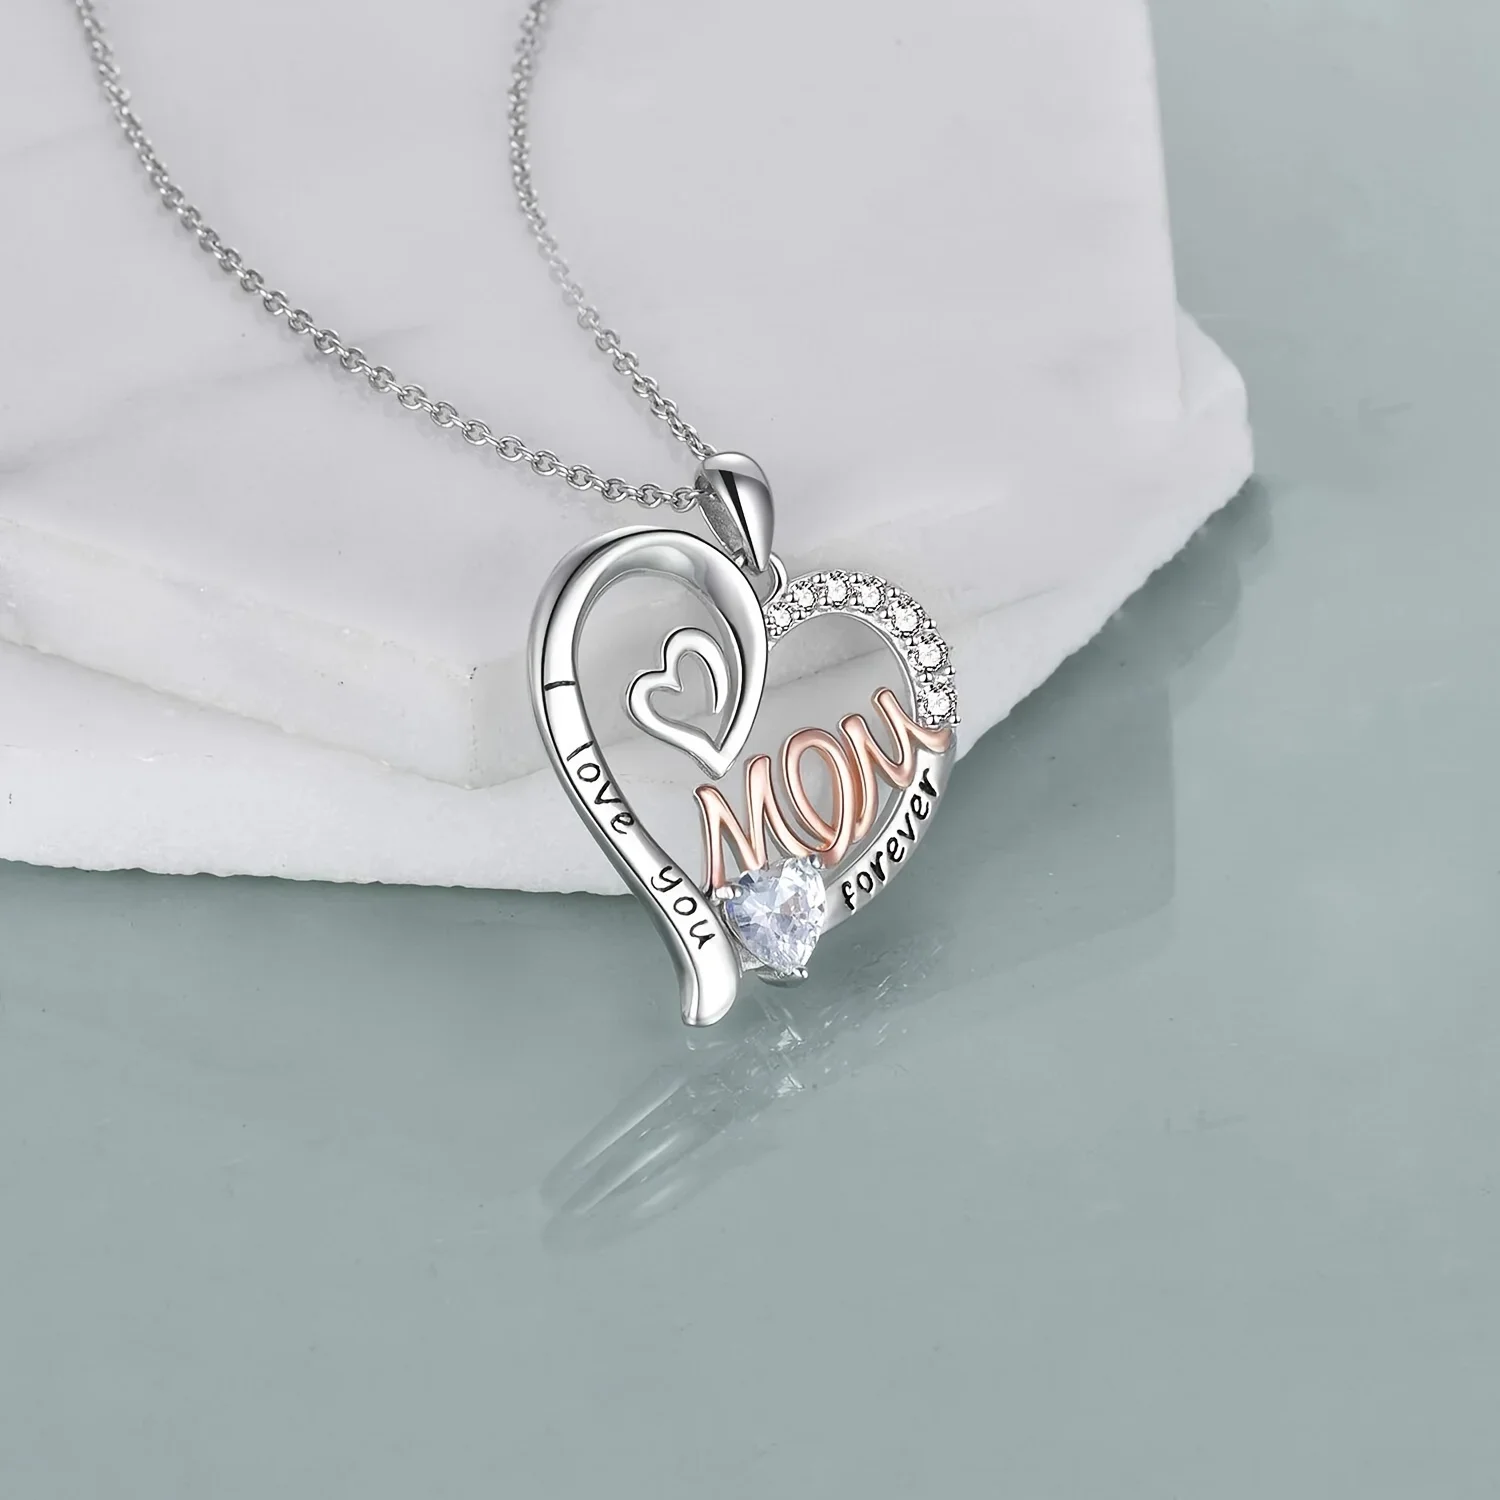 I Love You Mom Necklace With Luxury Rose Gift Box